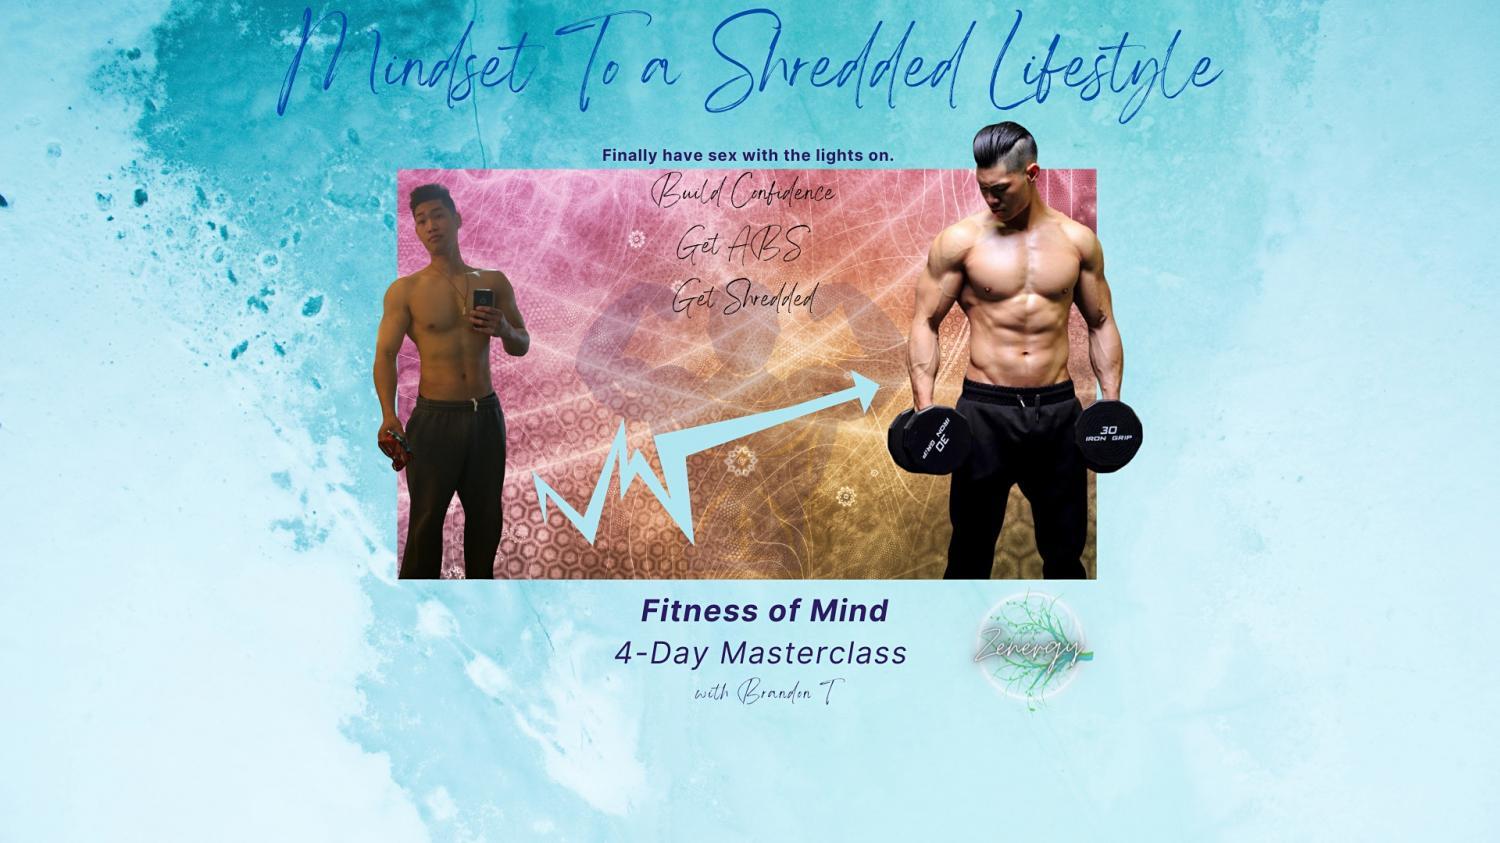 Get Shredded by Transforming Your Lifestyle - Cape Coral
Tue Nov 1, 2:00 PM - Tue Nov 1, 3:00 PM
in 13 days